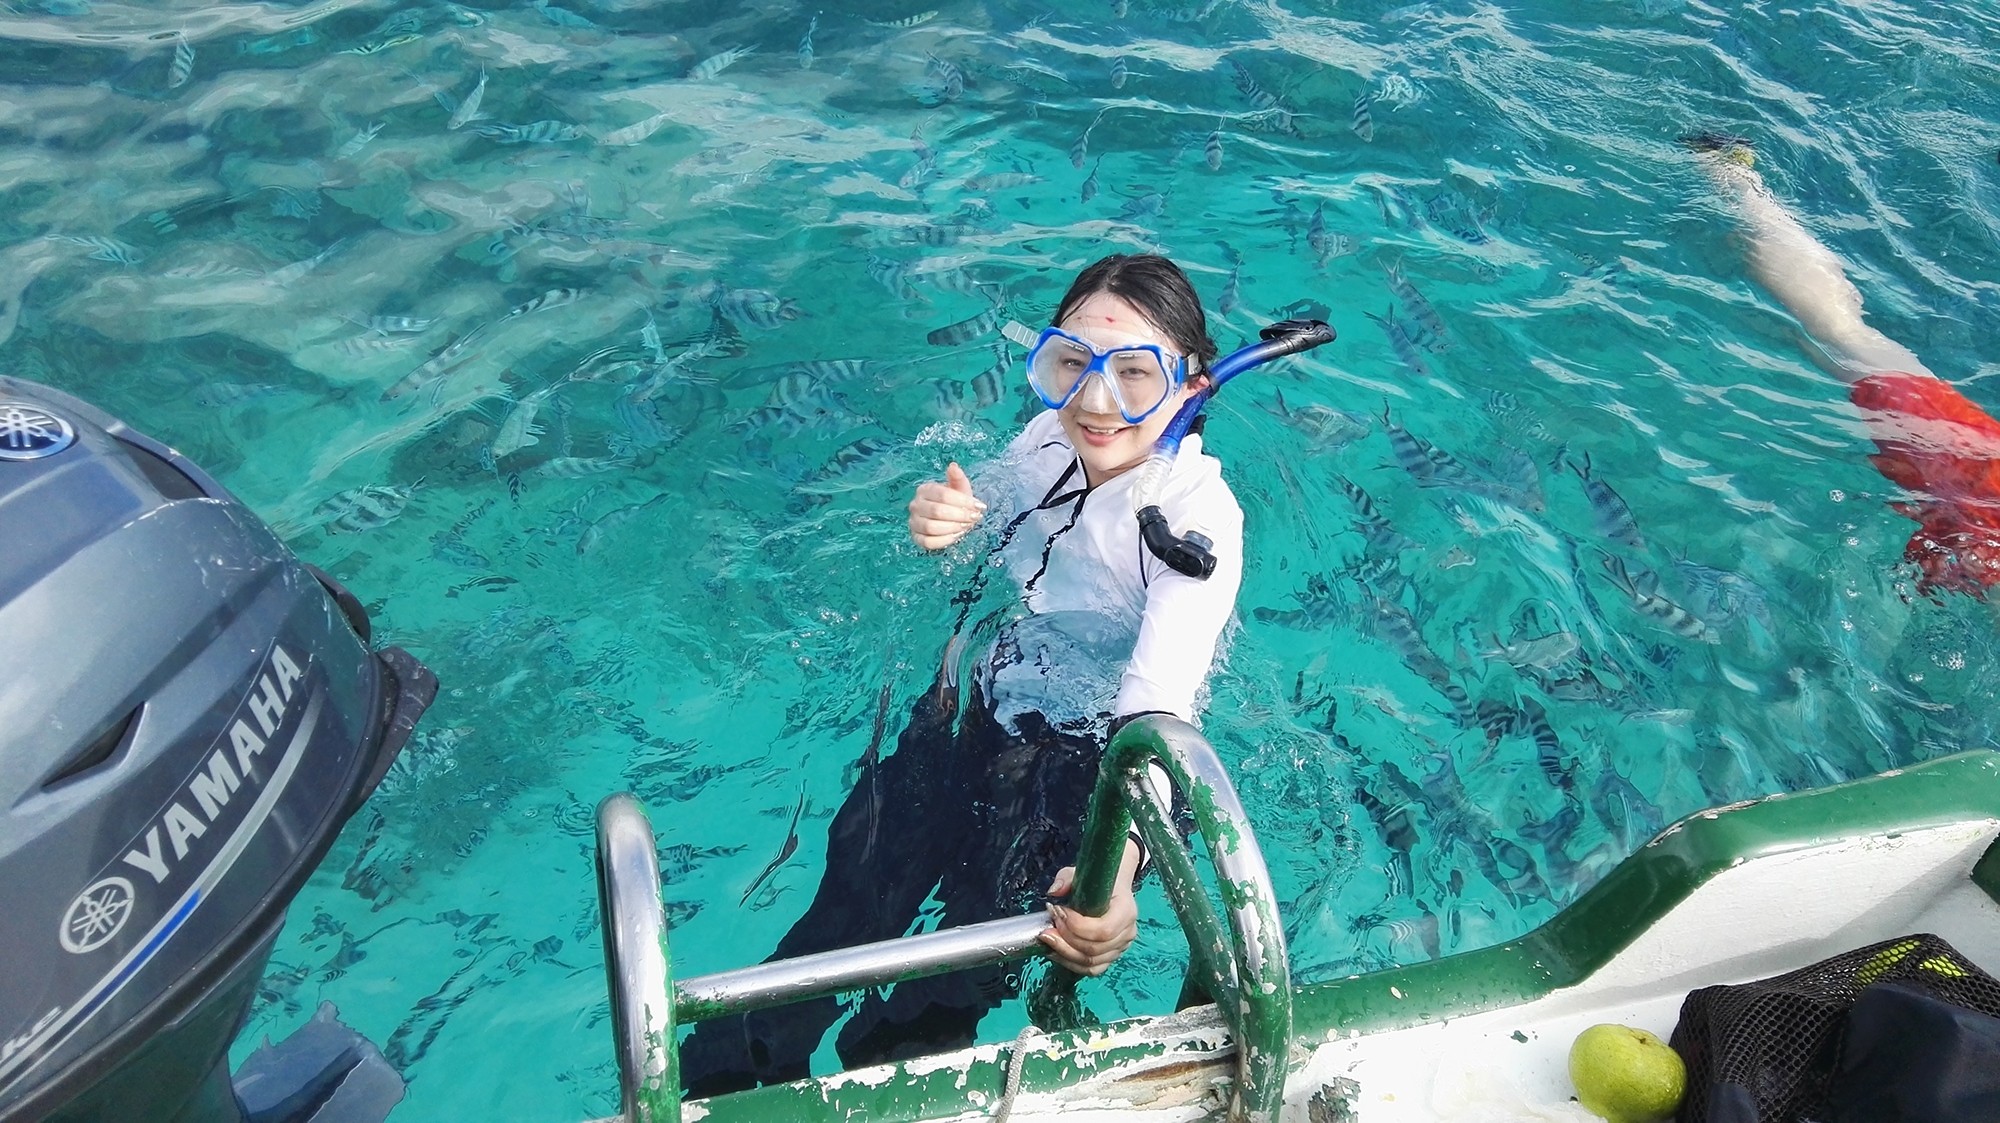 GLASS BOTTOM & SNORKELING EXPERIENCE AT BLUE BAY